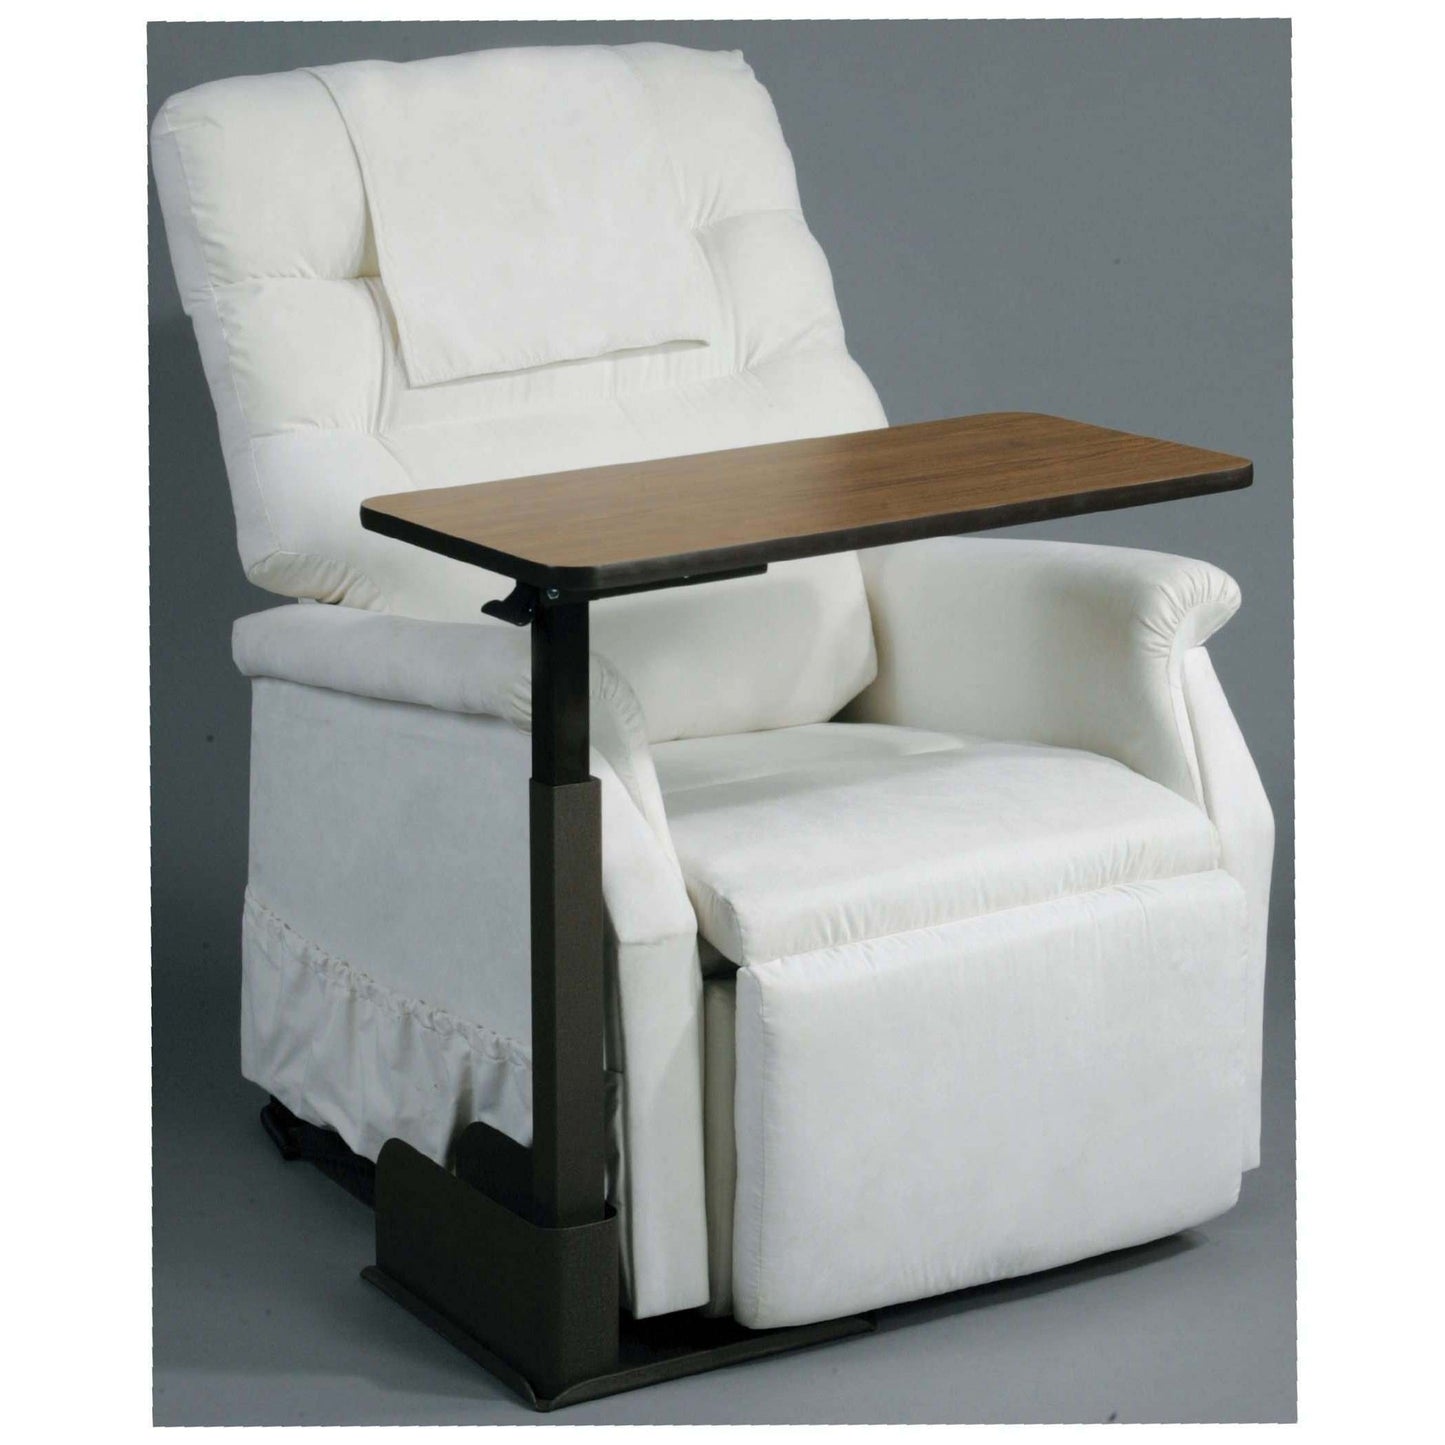 Drive 13085ln Seat Lift Chair Overbed Table, Left Side Table